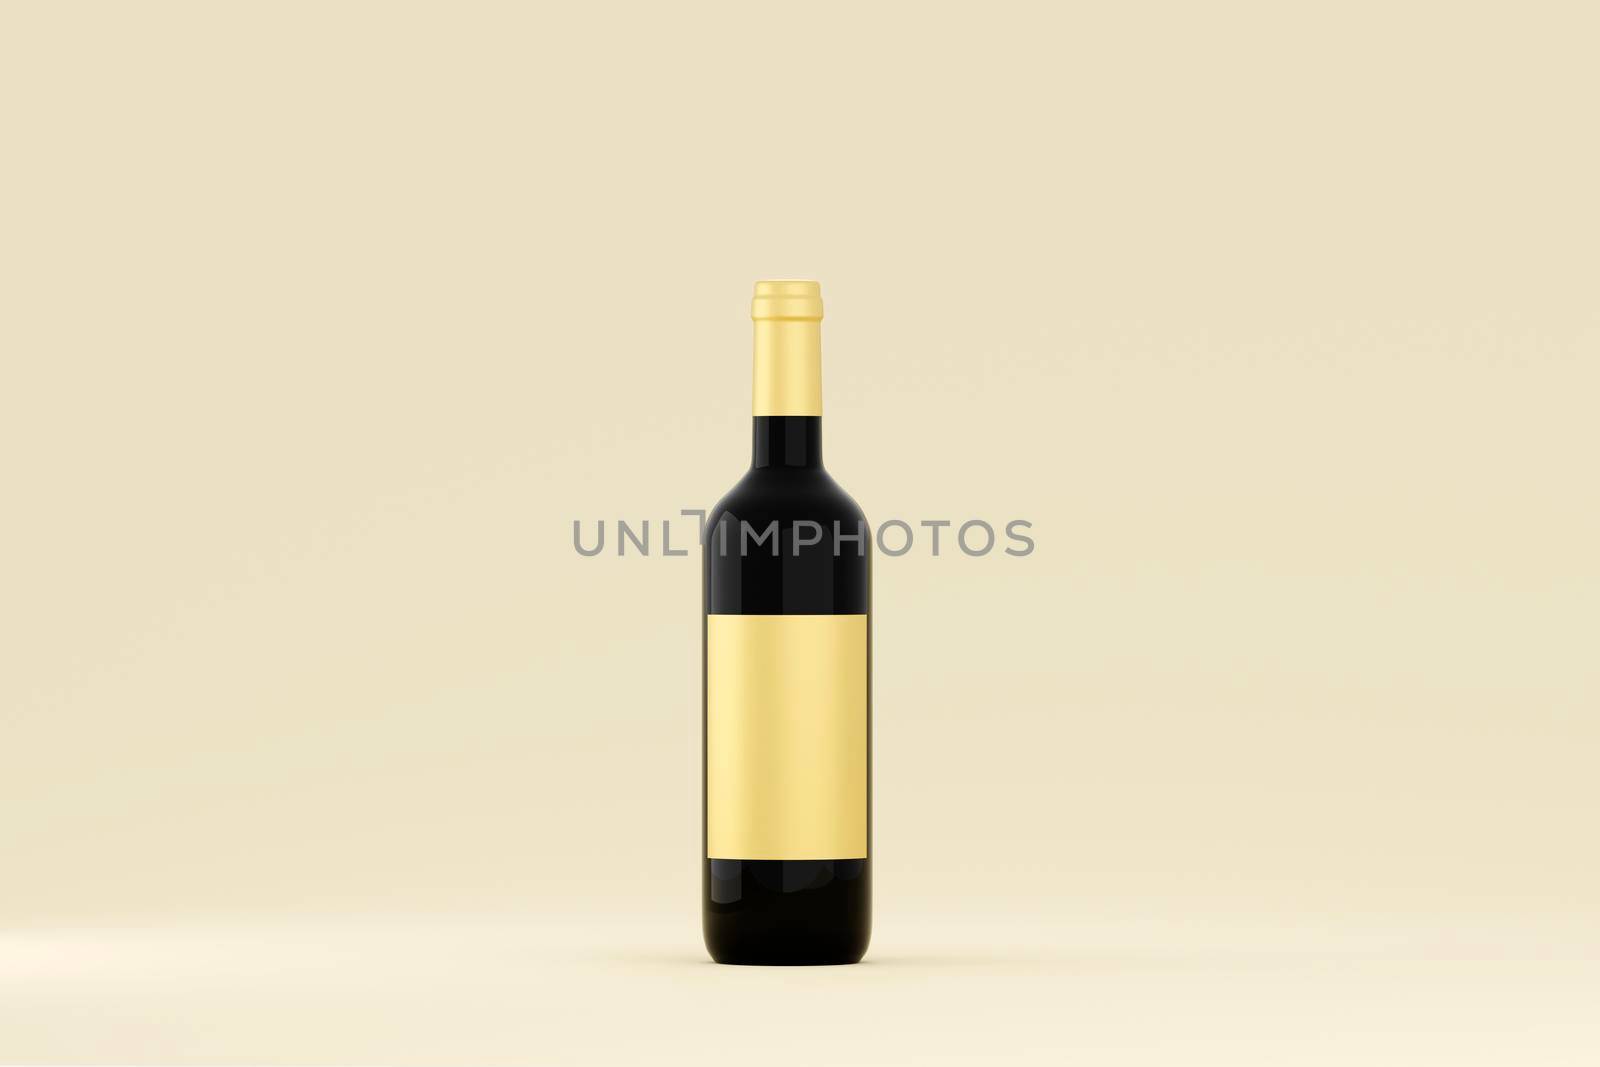 Red wine bottle mockup with white label on white background. 3D illustration by raferto1973